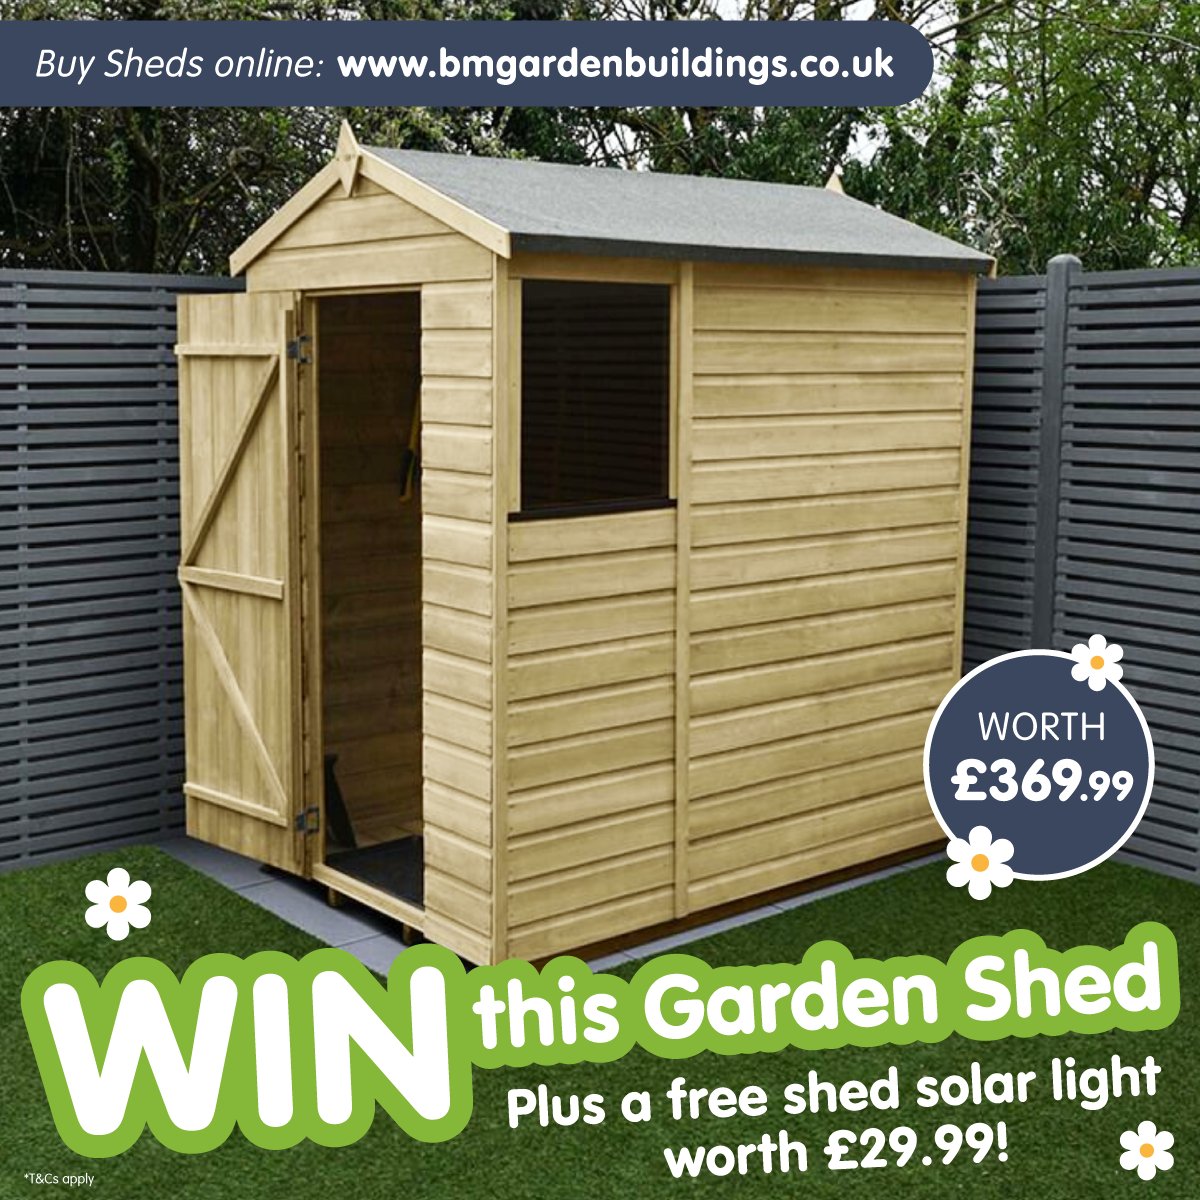 🌞 #COMPETITION TIME 🌞 We're giving ONE lucky winner a chance to #WIN a garden shed worth £369.99! You can browse our garden buildings PLUS buy online here; bmgardenbuildings.co.uk For a chance to #WIN, simply 1) FOLLOW 2) RT 3) COMMENT #BMShed Competition ends 9am 22/3/24